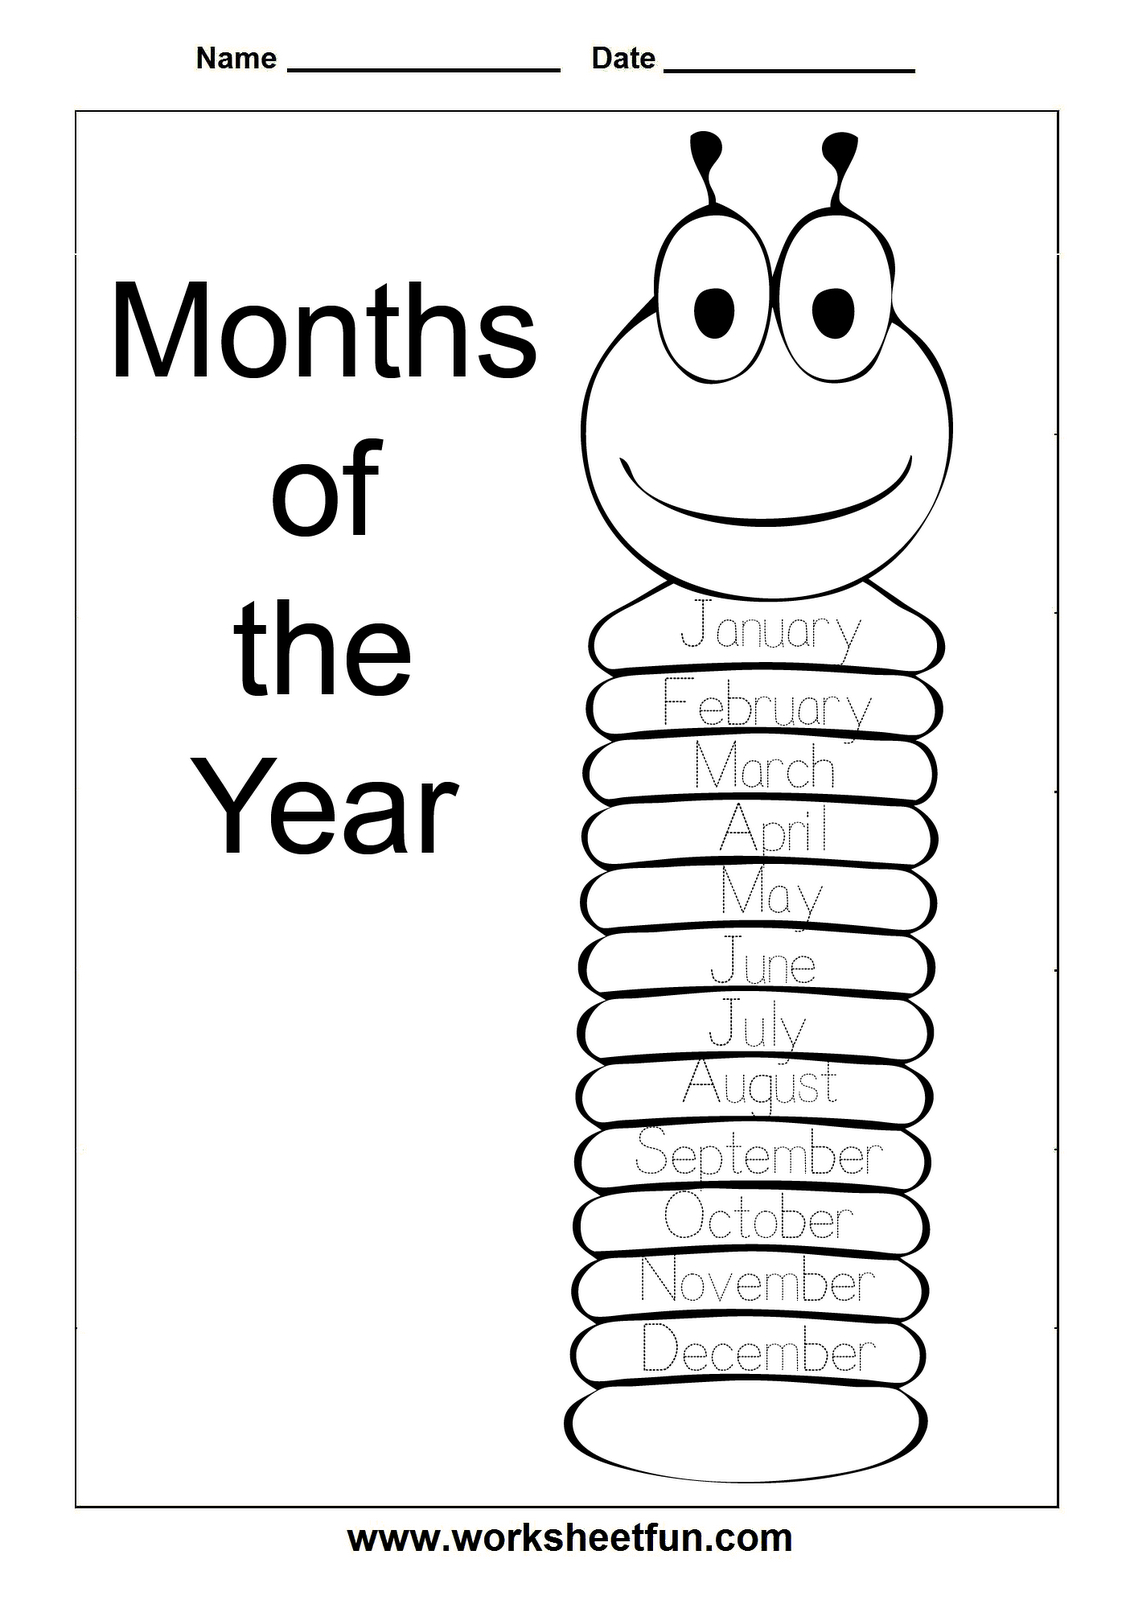 Months Of The Year - Spelling, Tracing And Chart | Teaching - Free Printable Months Of The Year Chart